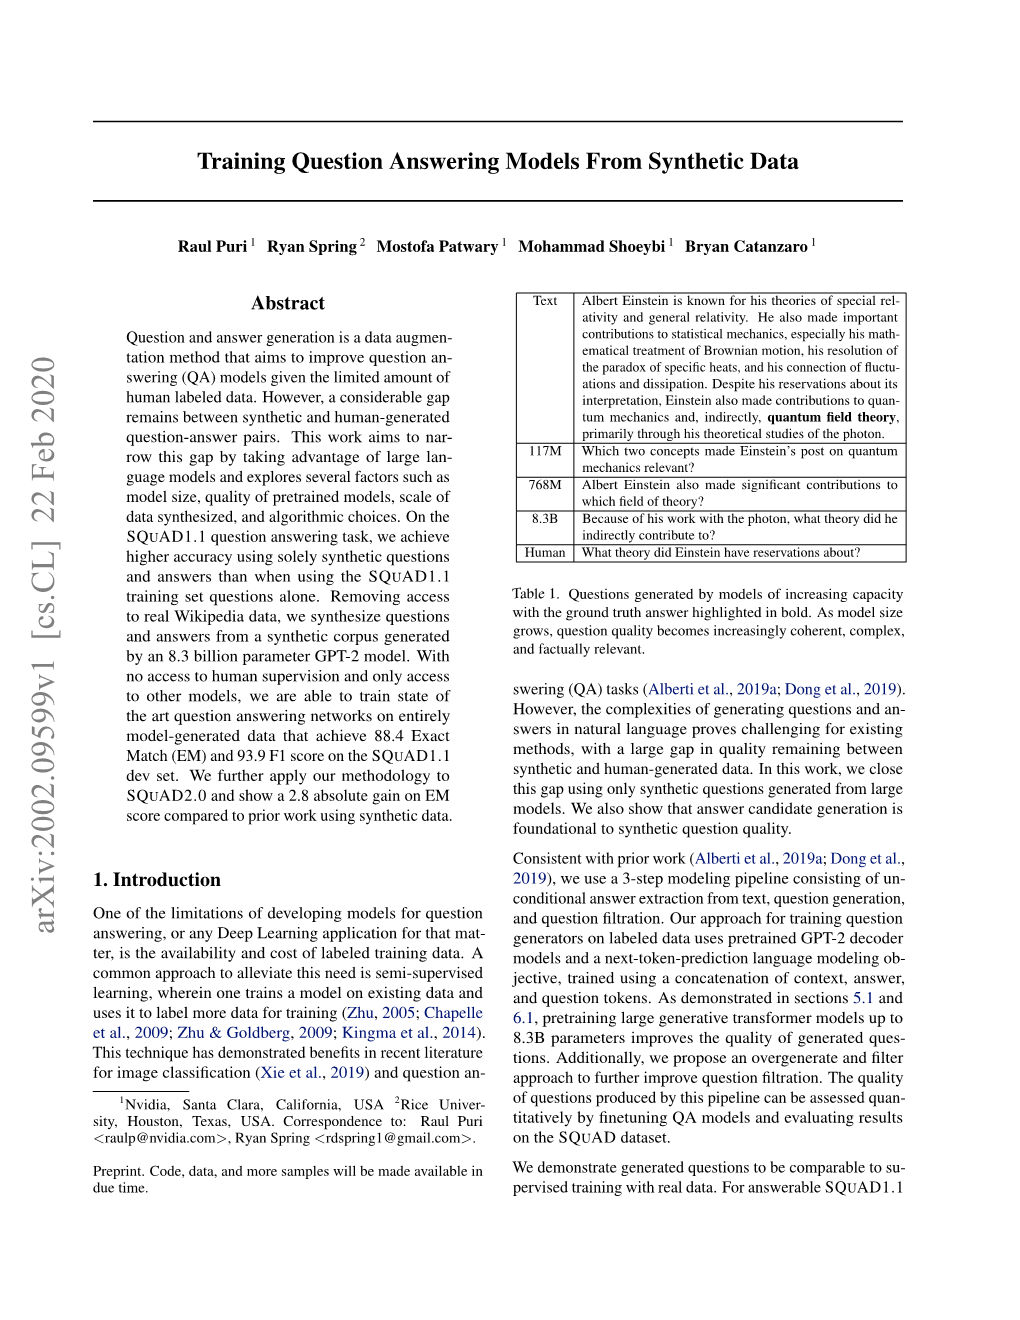 Training Question Answering Models from Synthetic Data